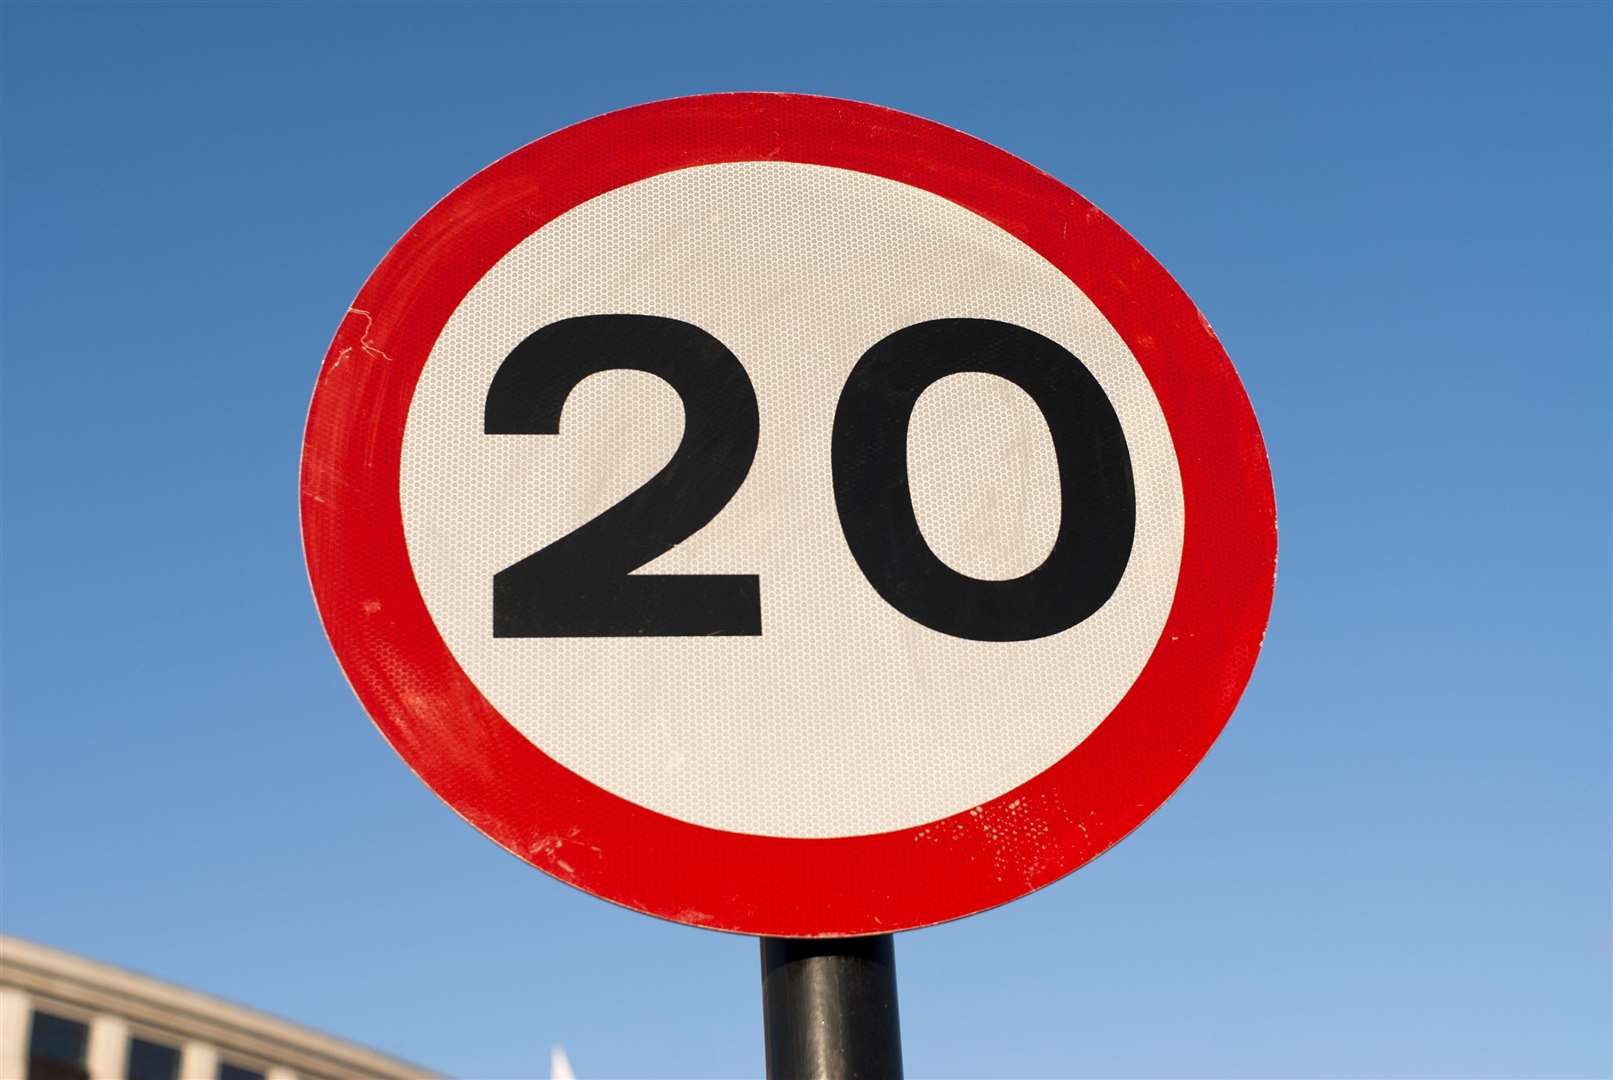 A mandatory 20mph speed limit is a new option for traffic calming measures on Kintore's School Road.